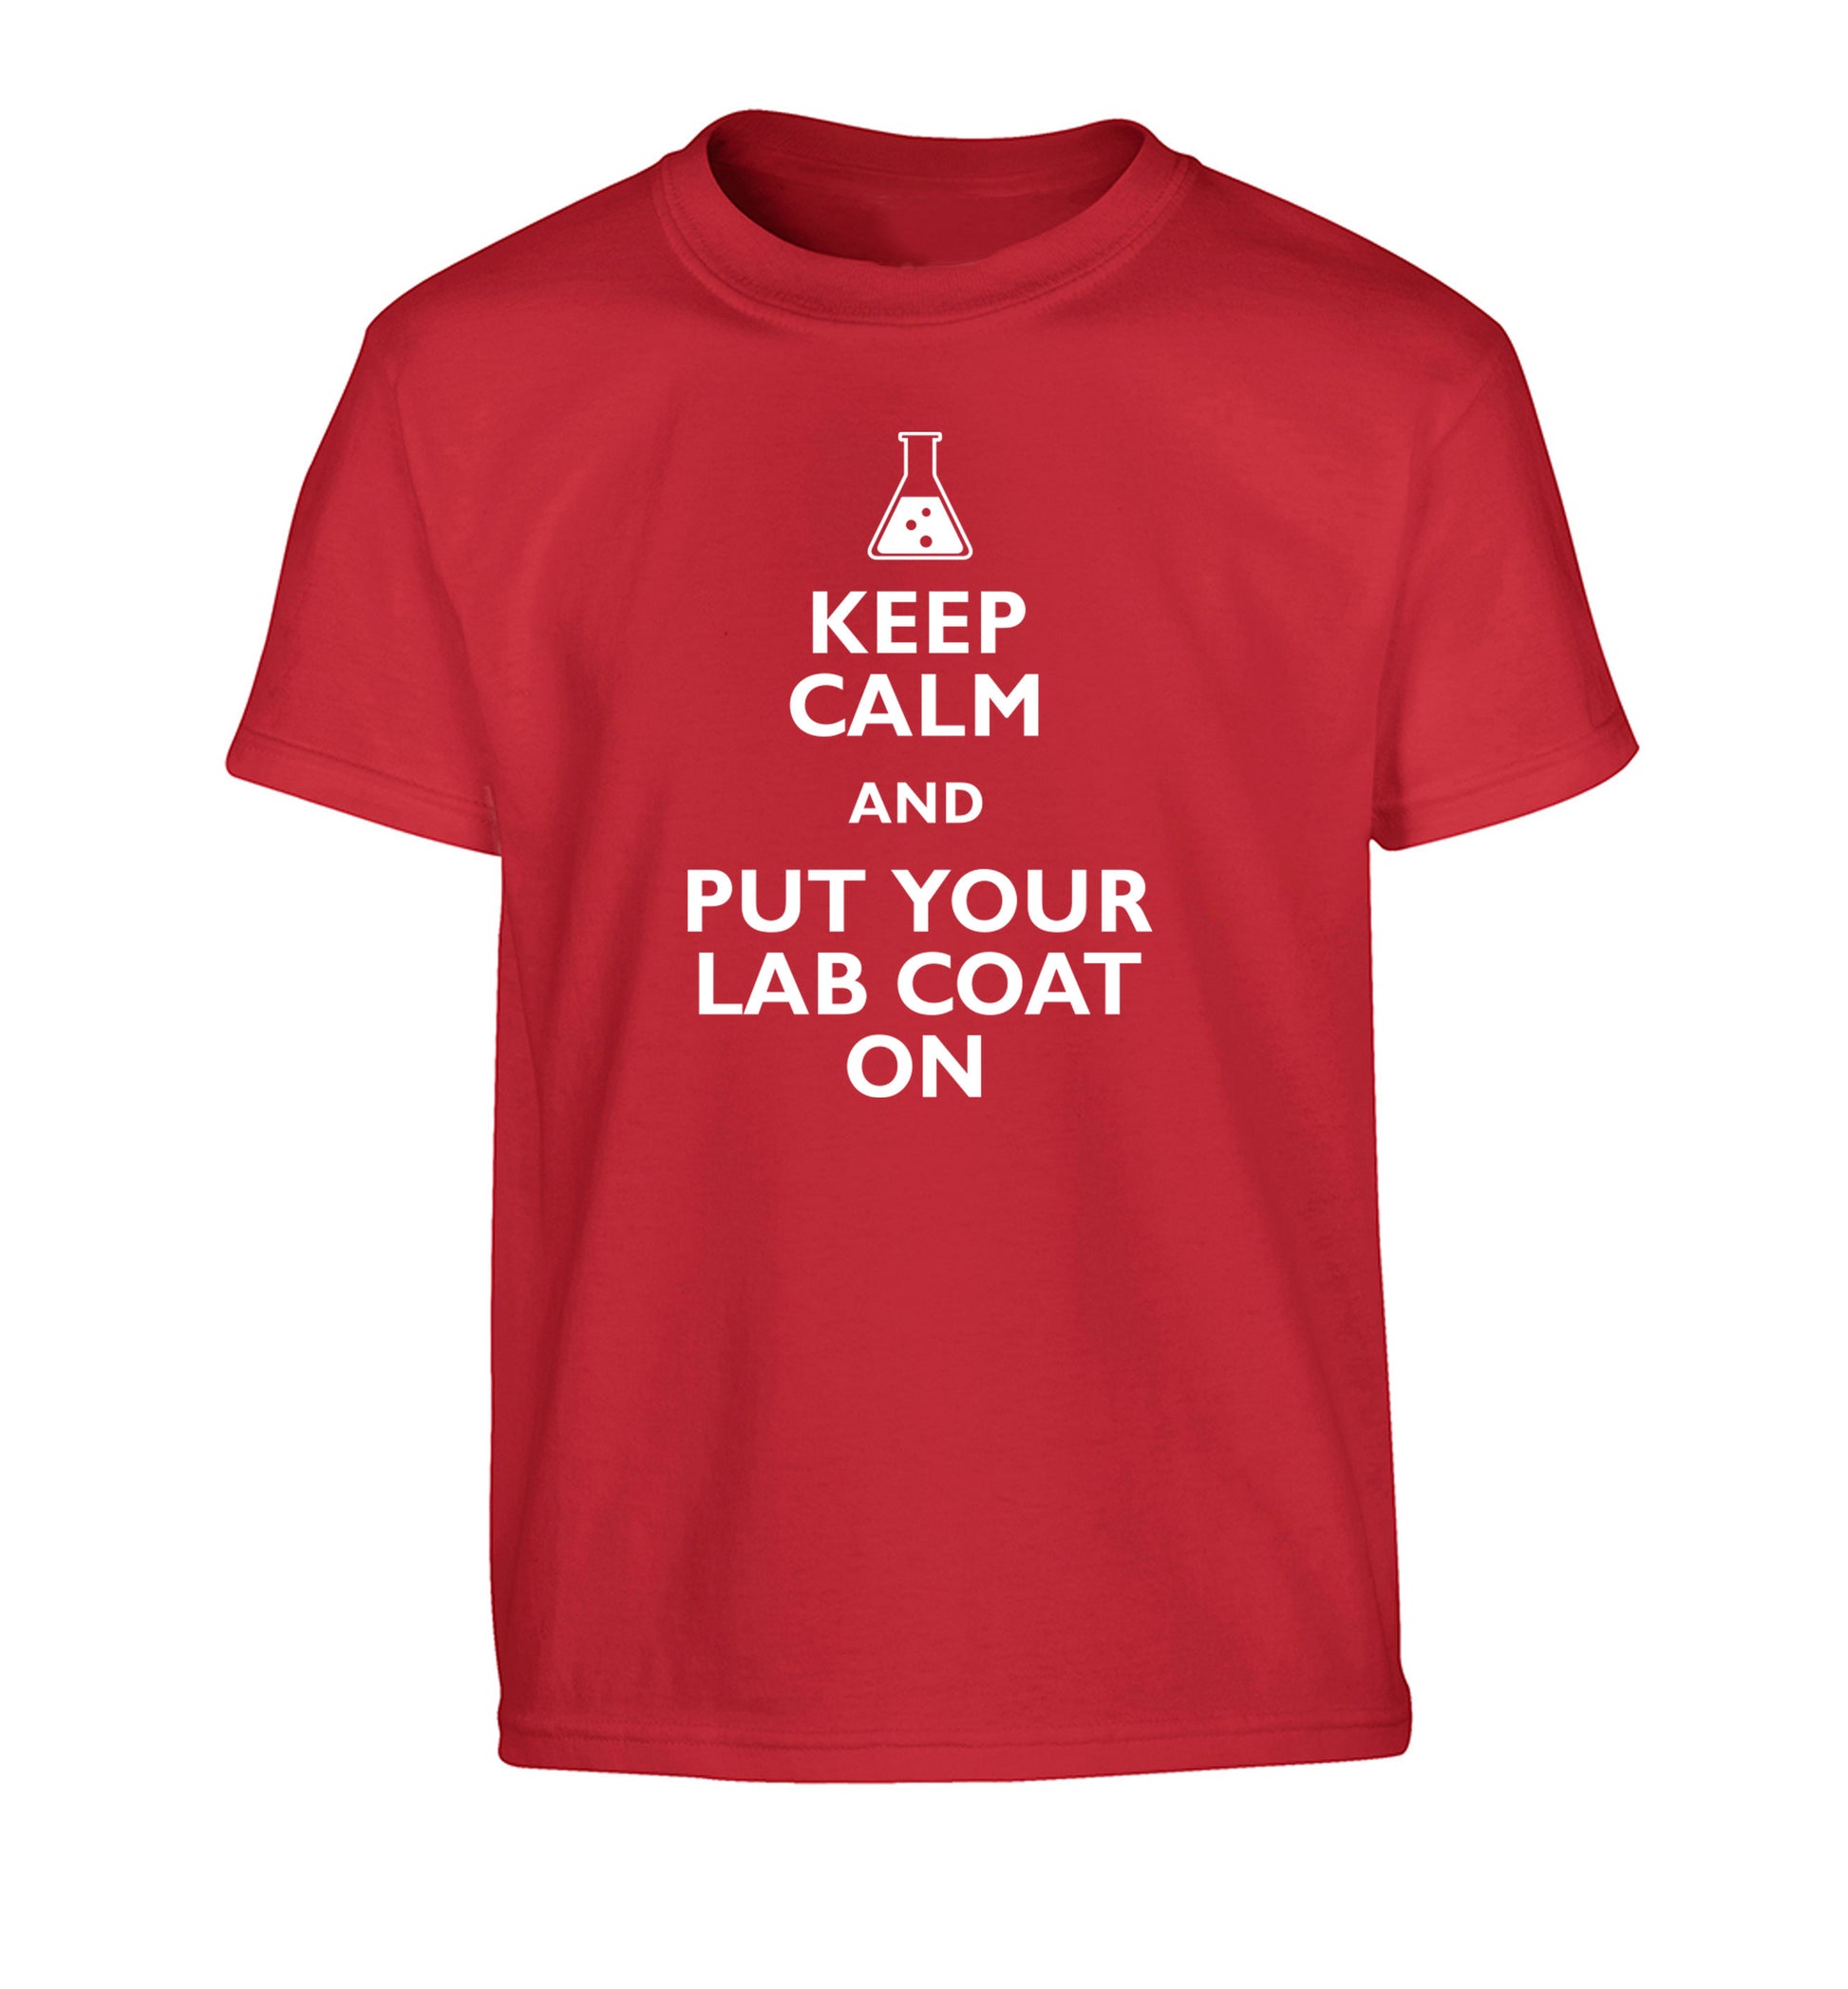 Keep calm and put your lab coat on Children's red Tshirt 12-14 Years